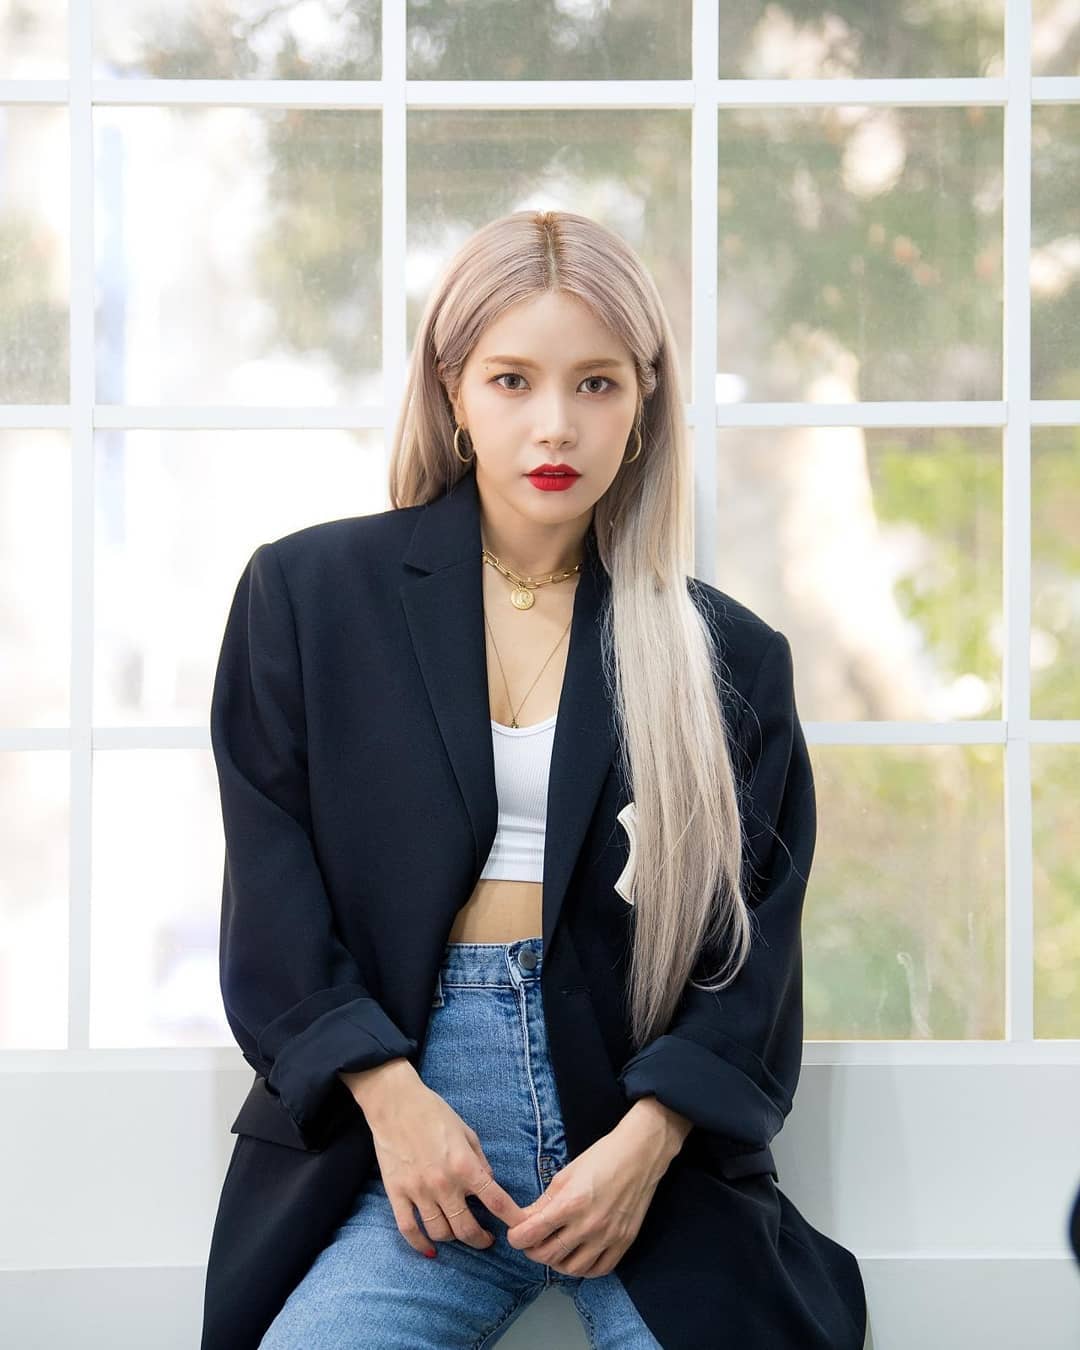 Mamamoo Solar releases its first single in six years since its debut